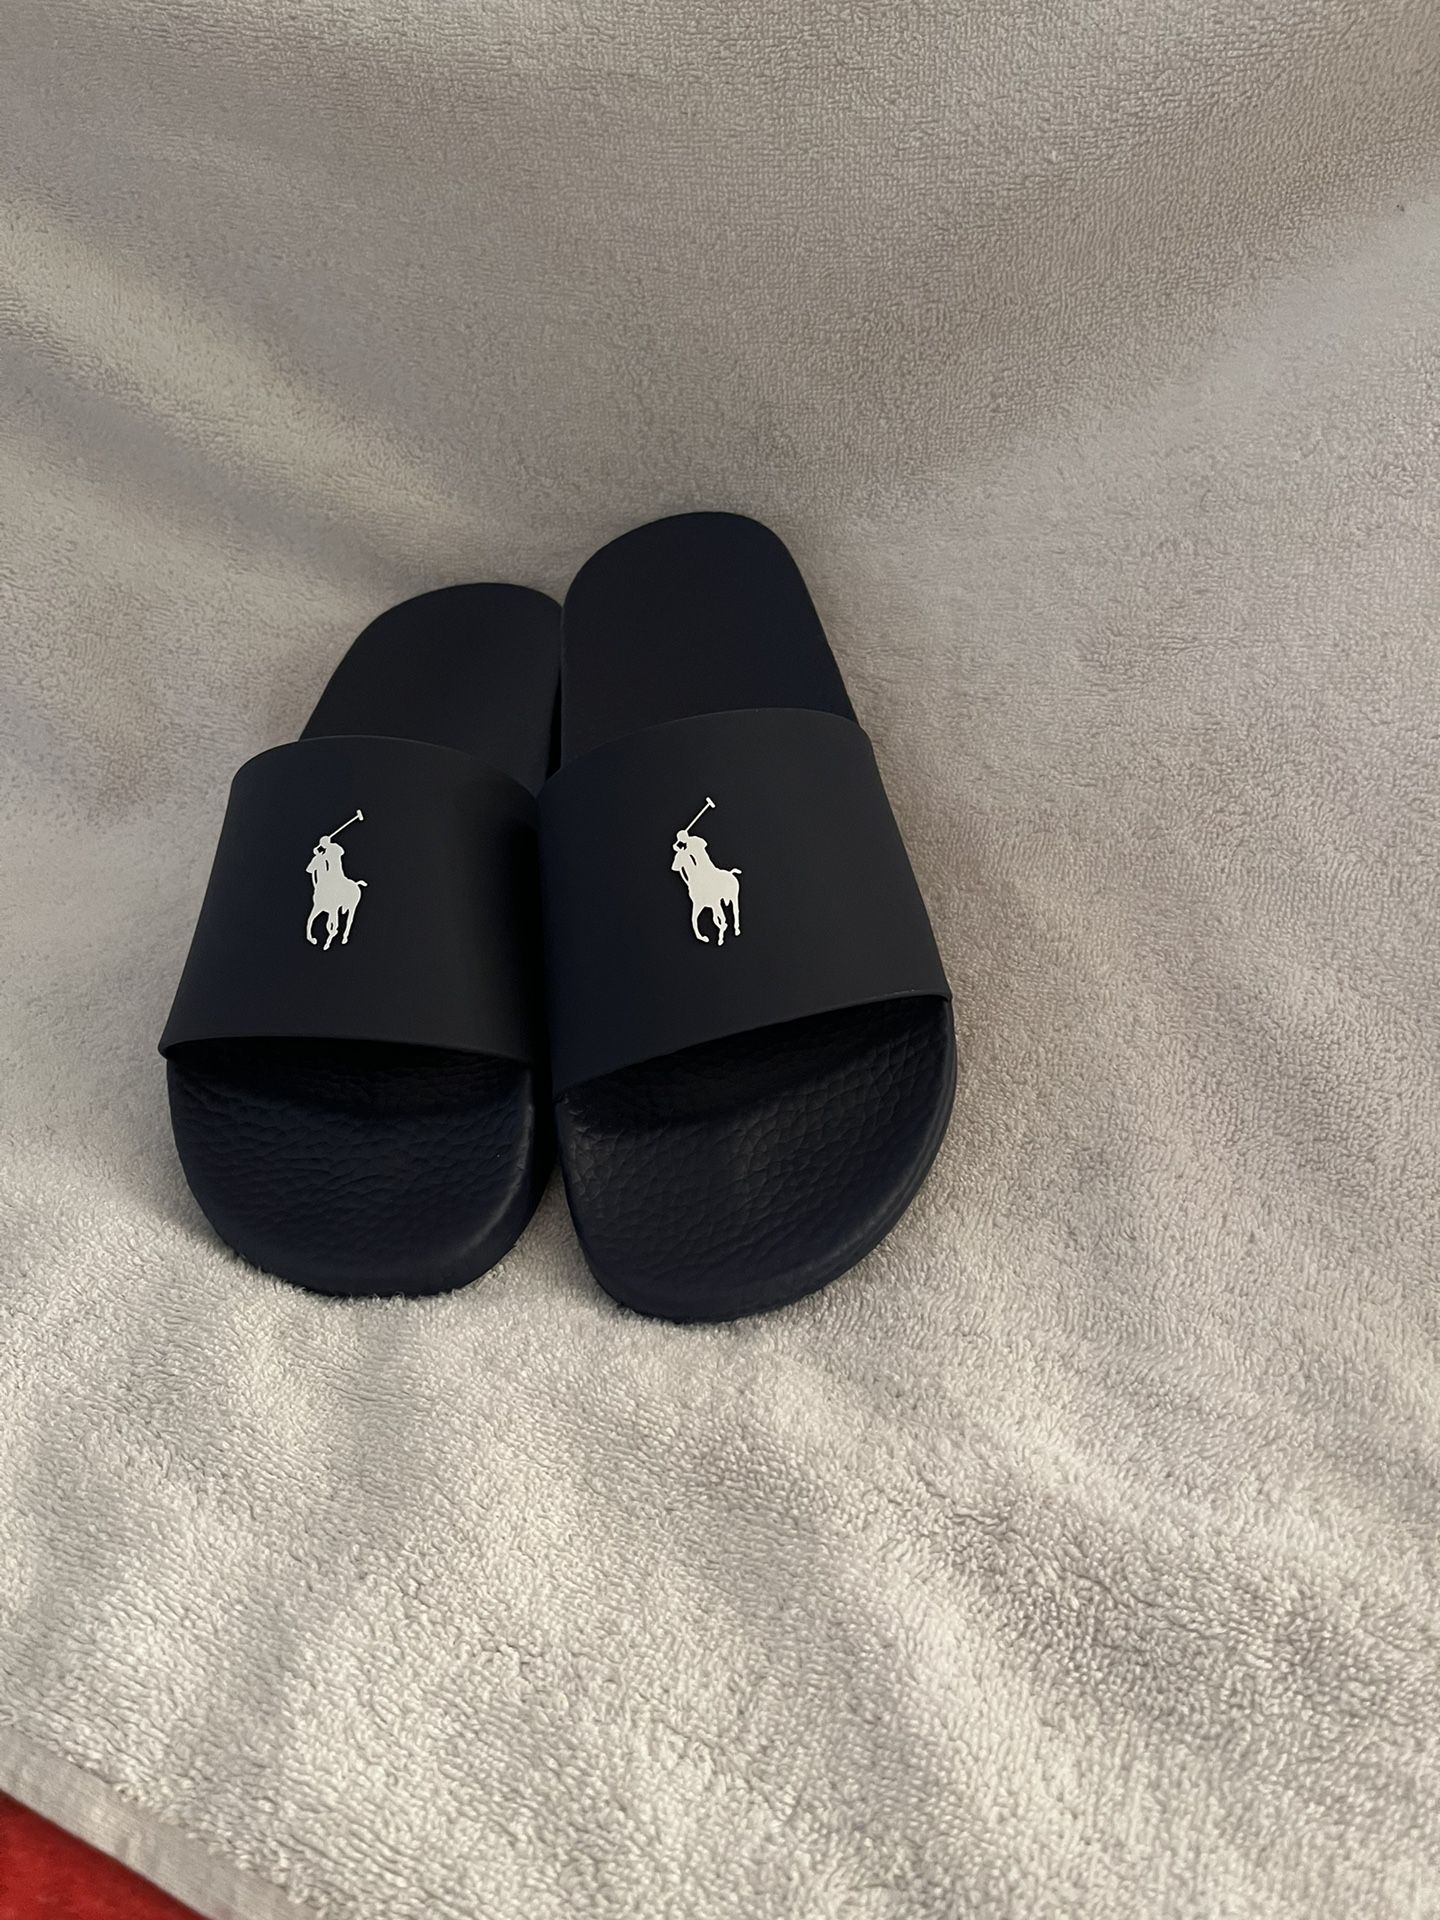 Polo Slides for Sale in San Antonio, TX - OfferUp